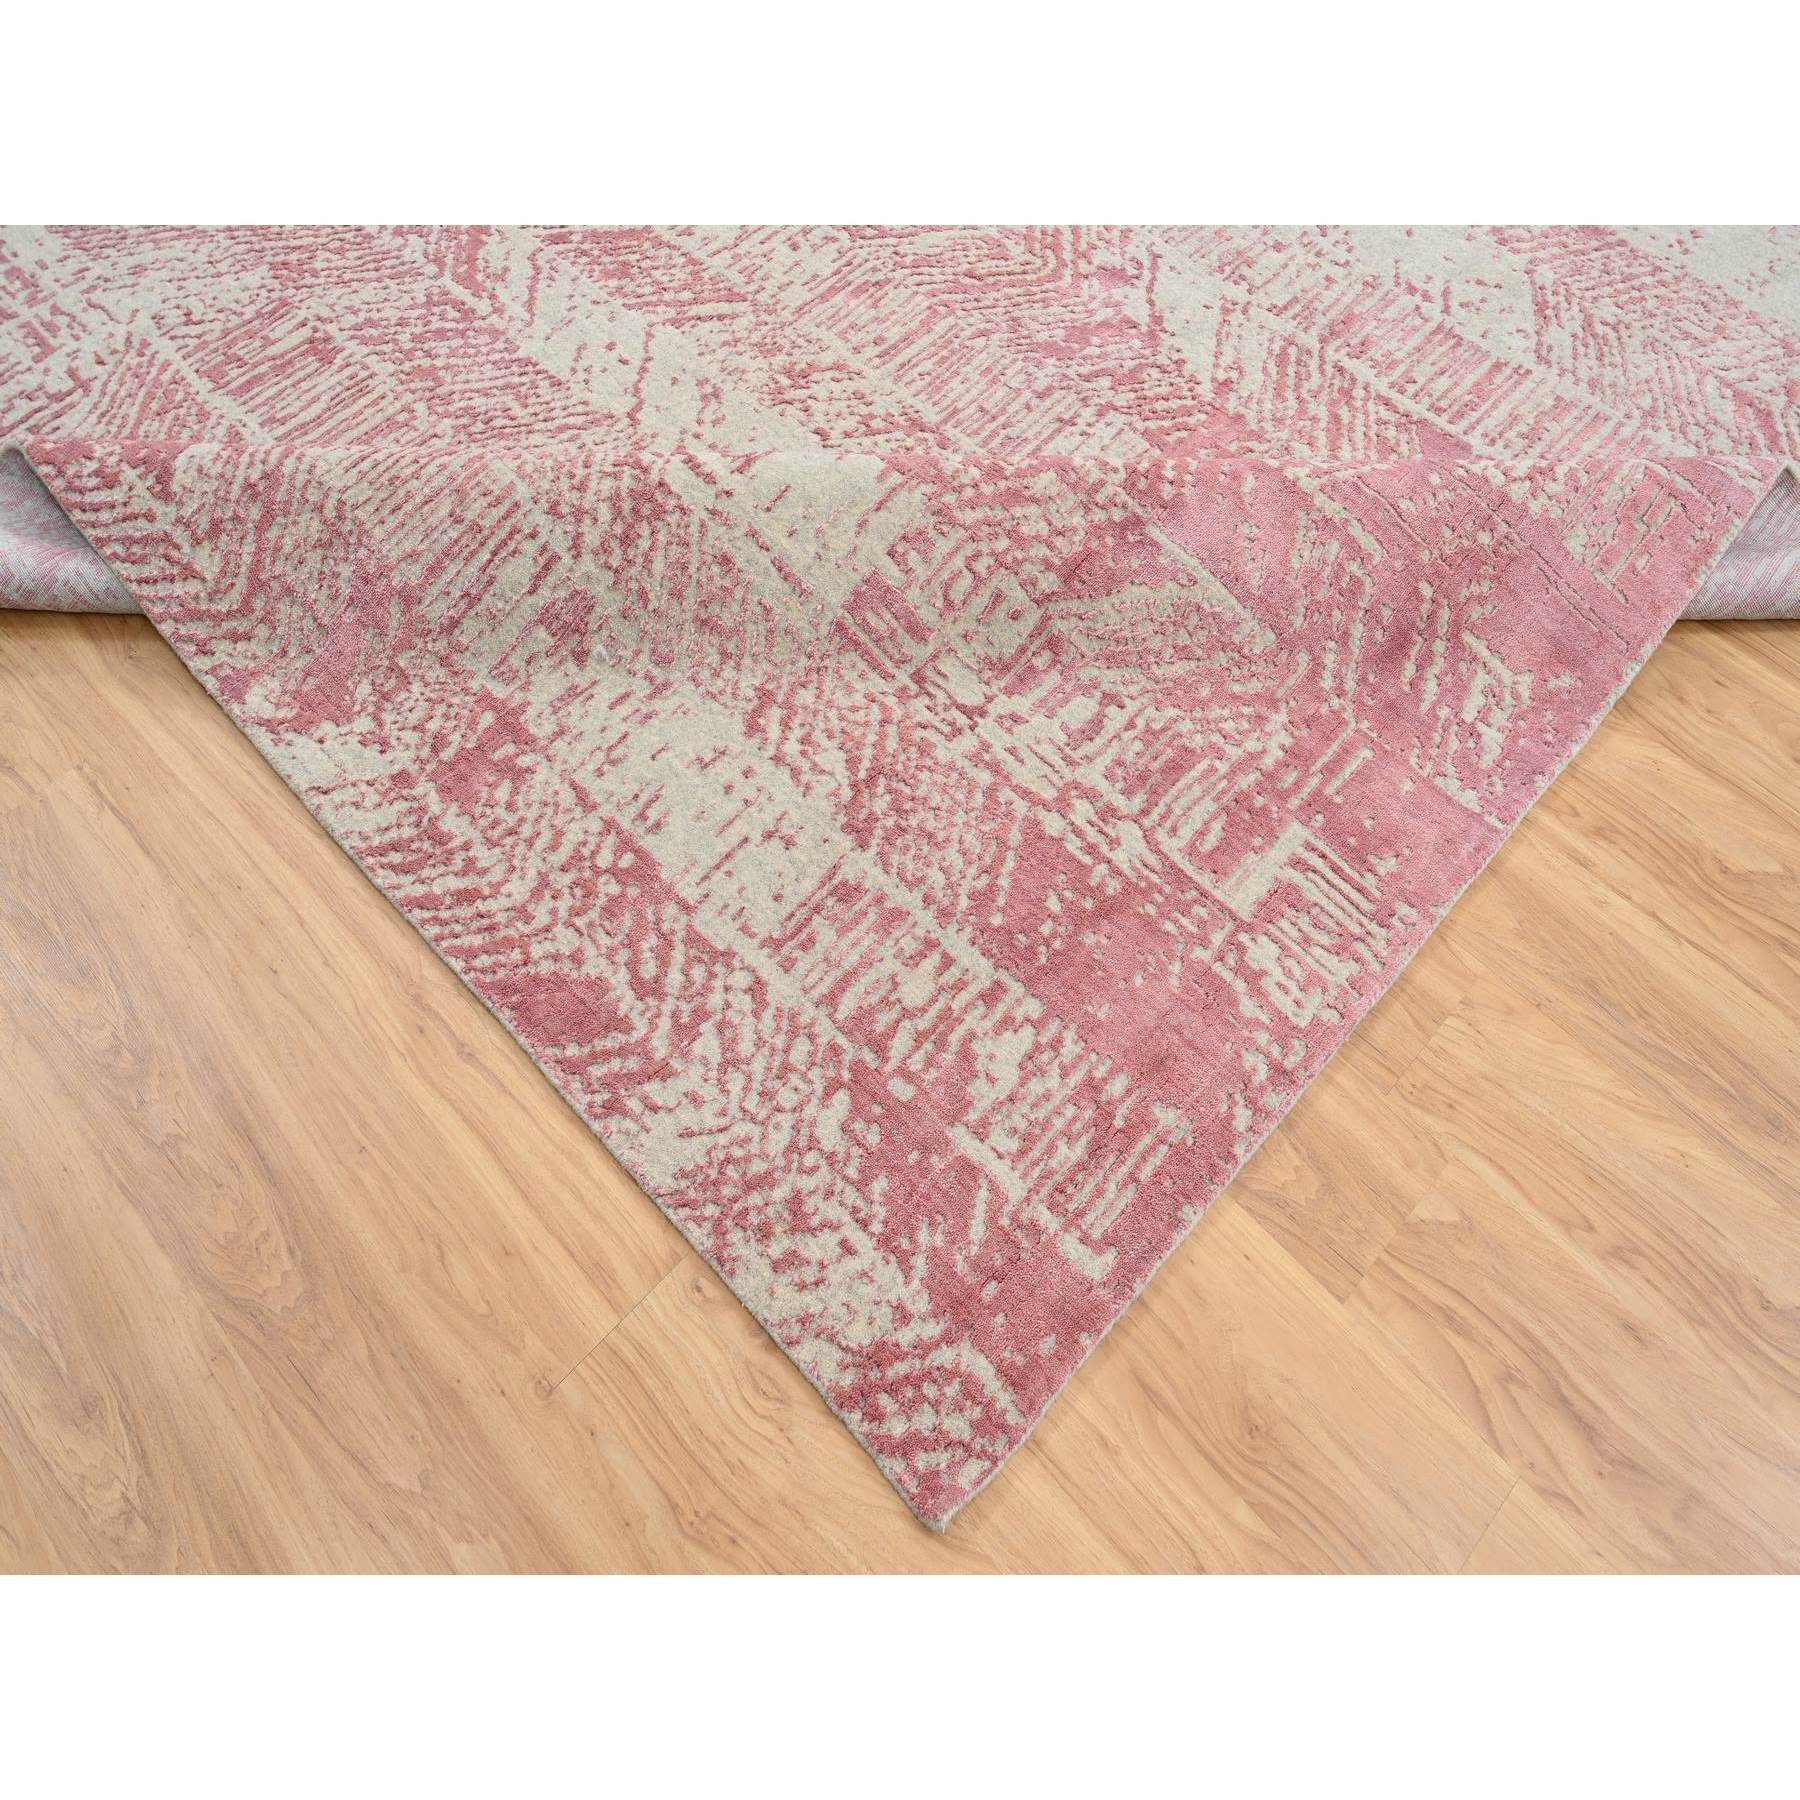 12'x12' Rose Pink, All Over Design, Wool and Art Silk Jacquard Hand Loomed Square Oriental Rug 